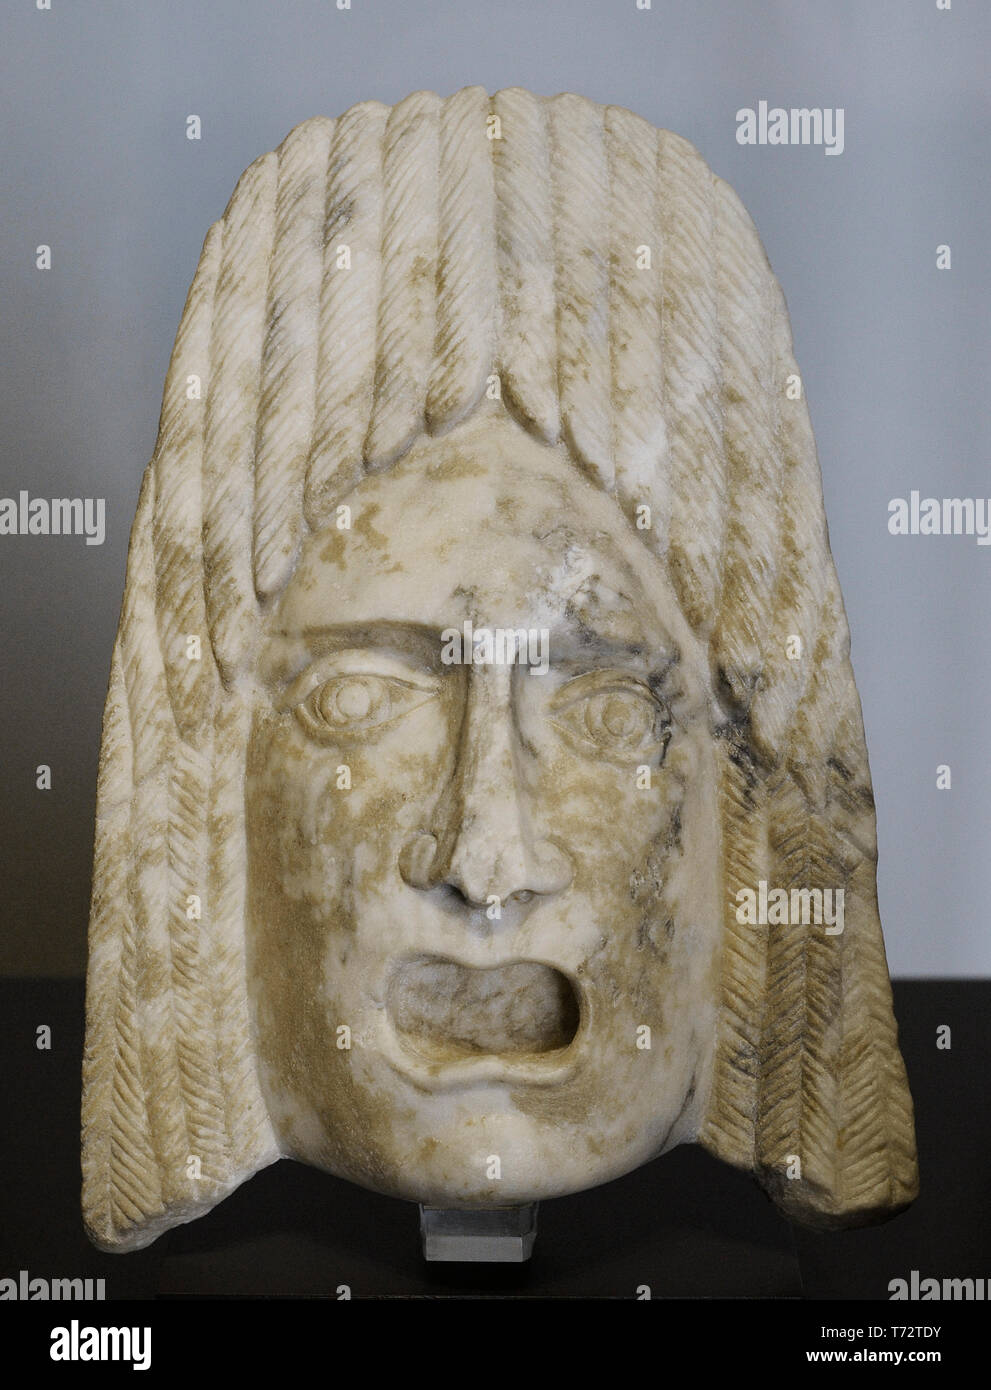 Tragic mask. Architectural element. 1st-2nd century AD. Marble. From Bañuelas (Avila province, Castile and Leon, Spain). National Archaeological Museum. Madrid. Spain. Stock Photo